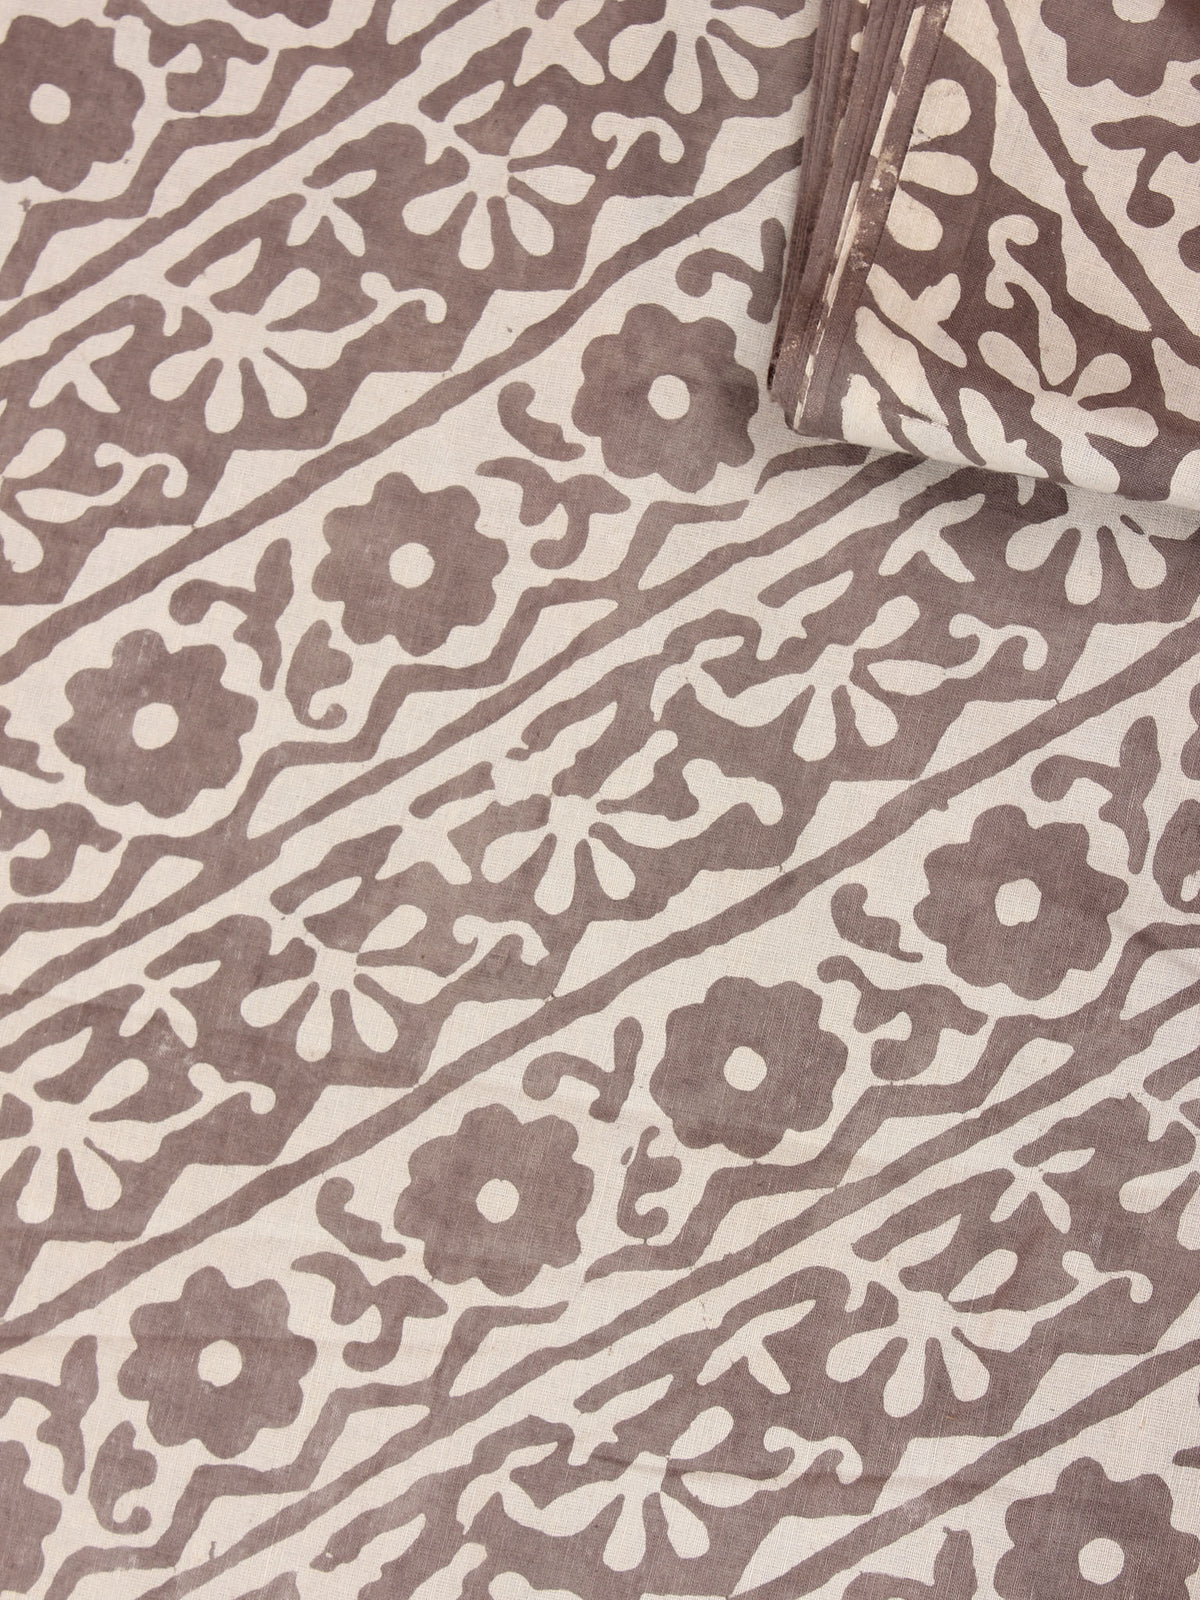 Beige Brown Natural Dyed Hand Block Printed Cotton Fabric Per Meter - F0916237